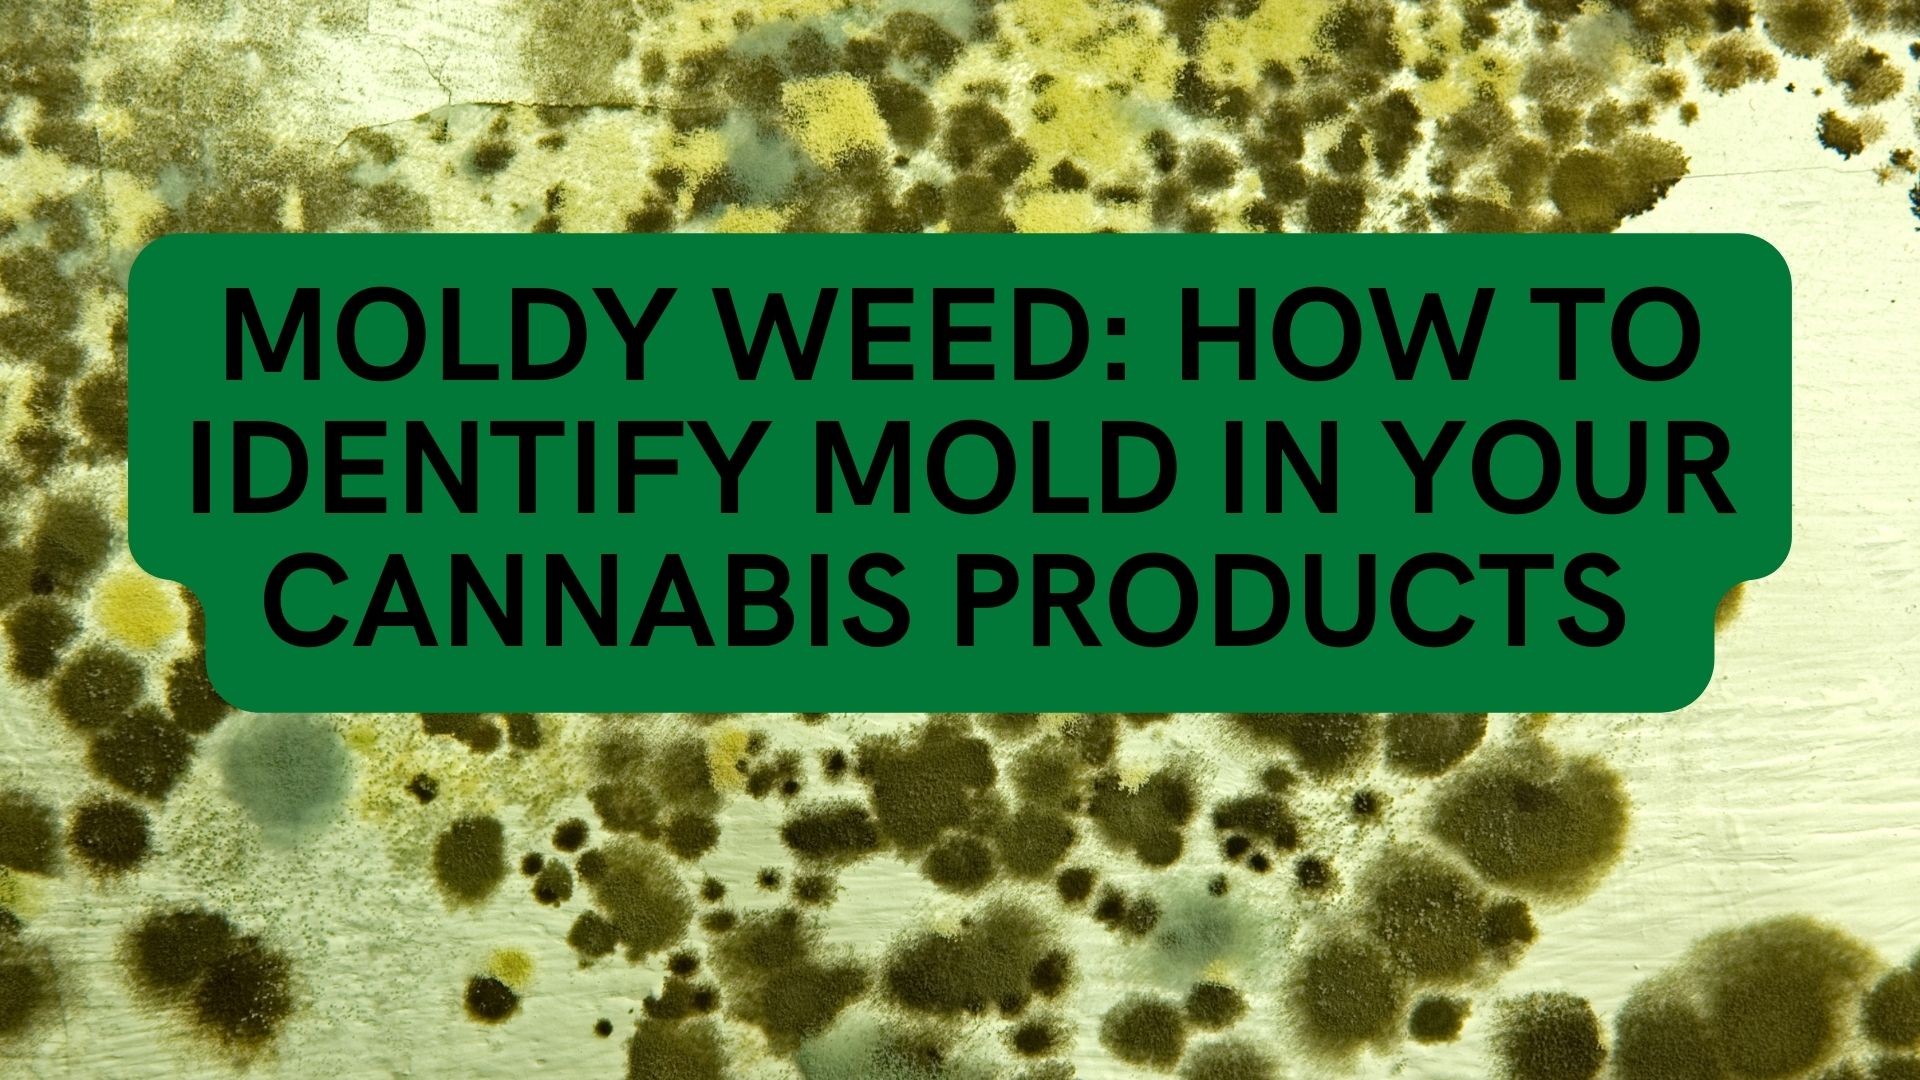 Moldy Weed: How to Identify Mold in Your Cannabis Products